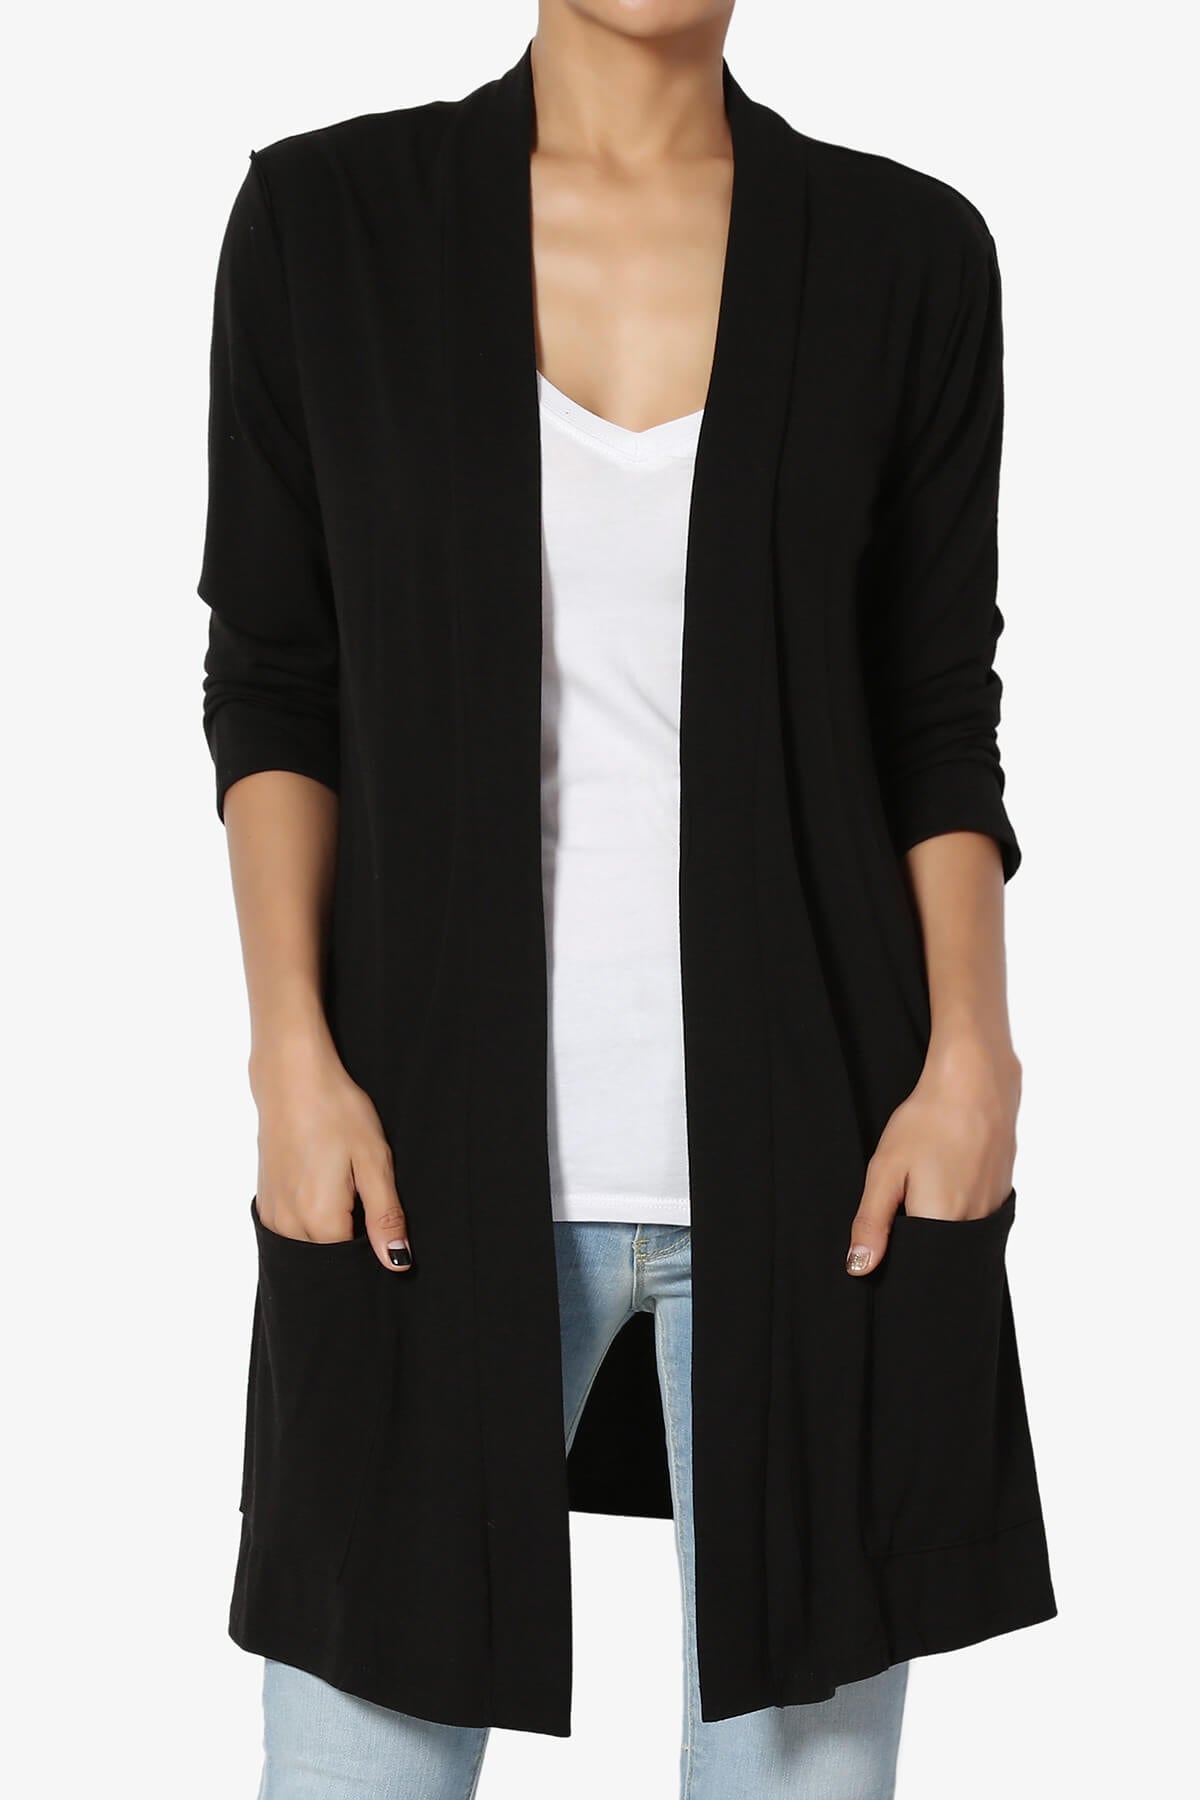 Load image into Gallery viewer, Daday Slouchy Pocket 3/4 Sleeve Cardigan BLACK_1
